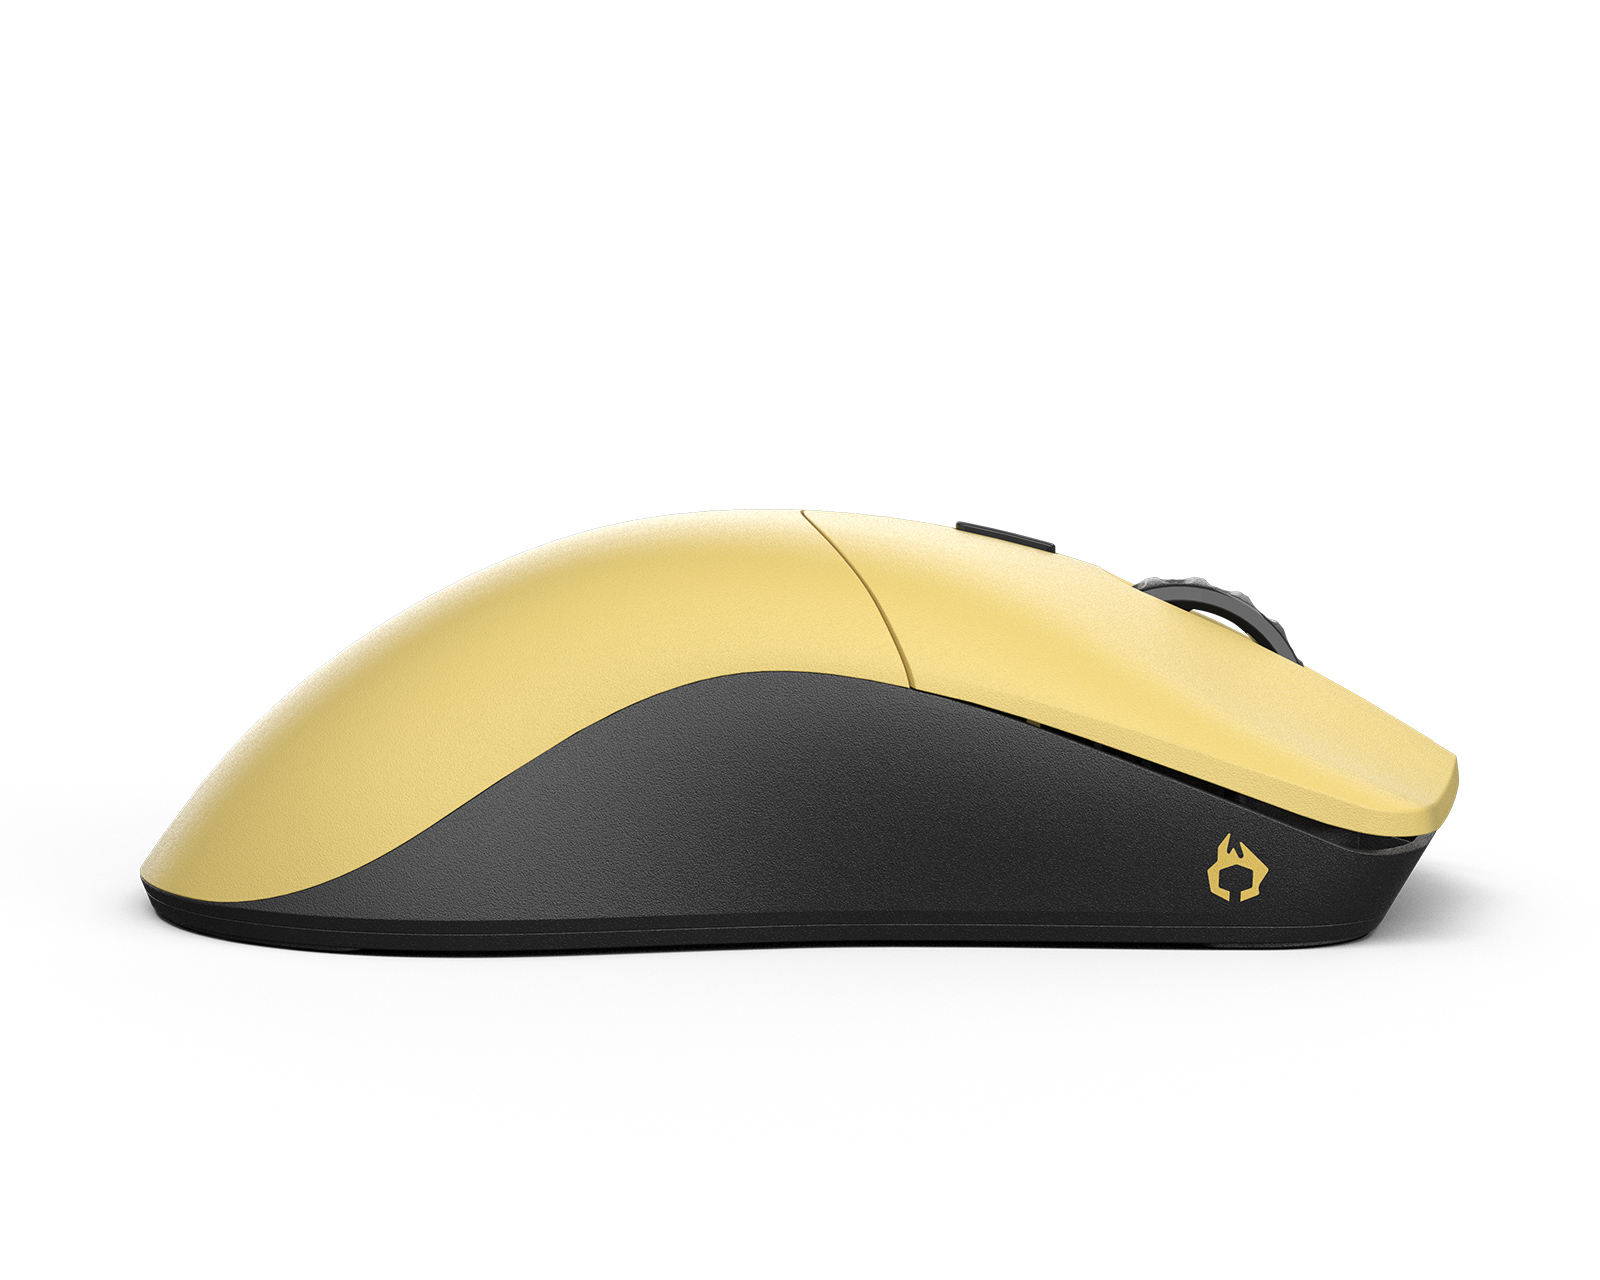 Glorious Model O Pro Wireless Gaming Mouse - Golden Panda - Forge